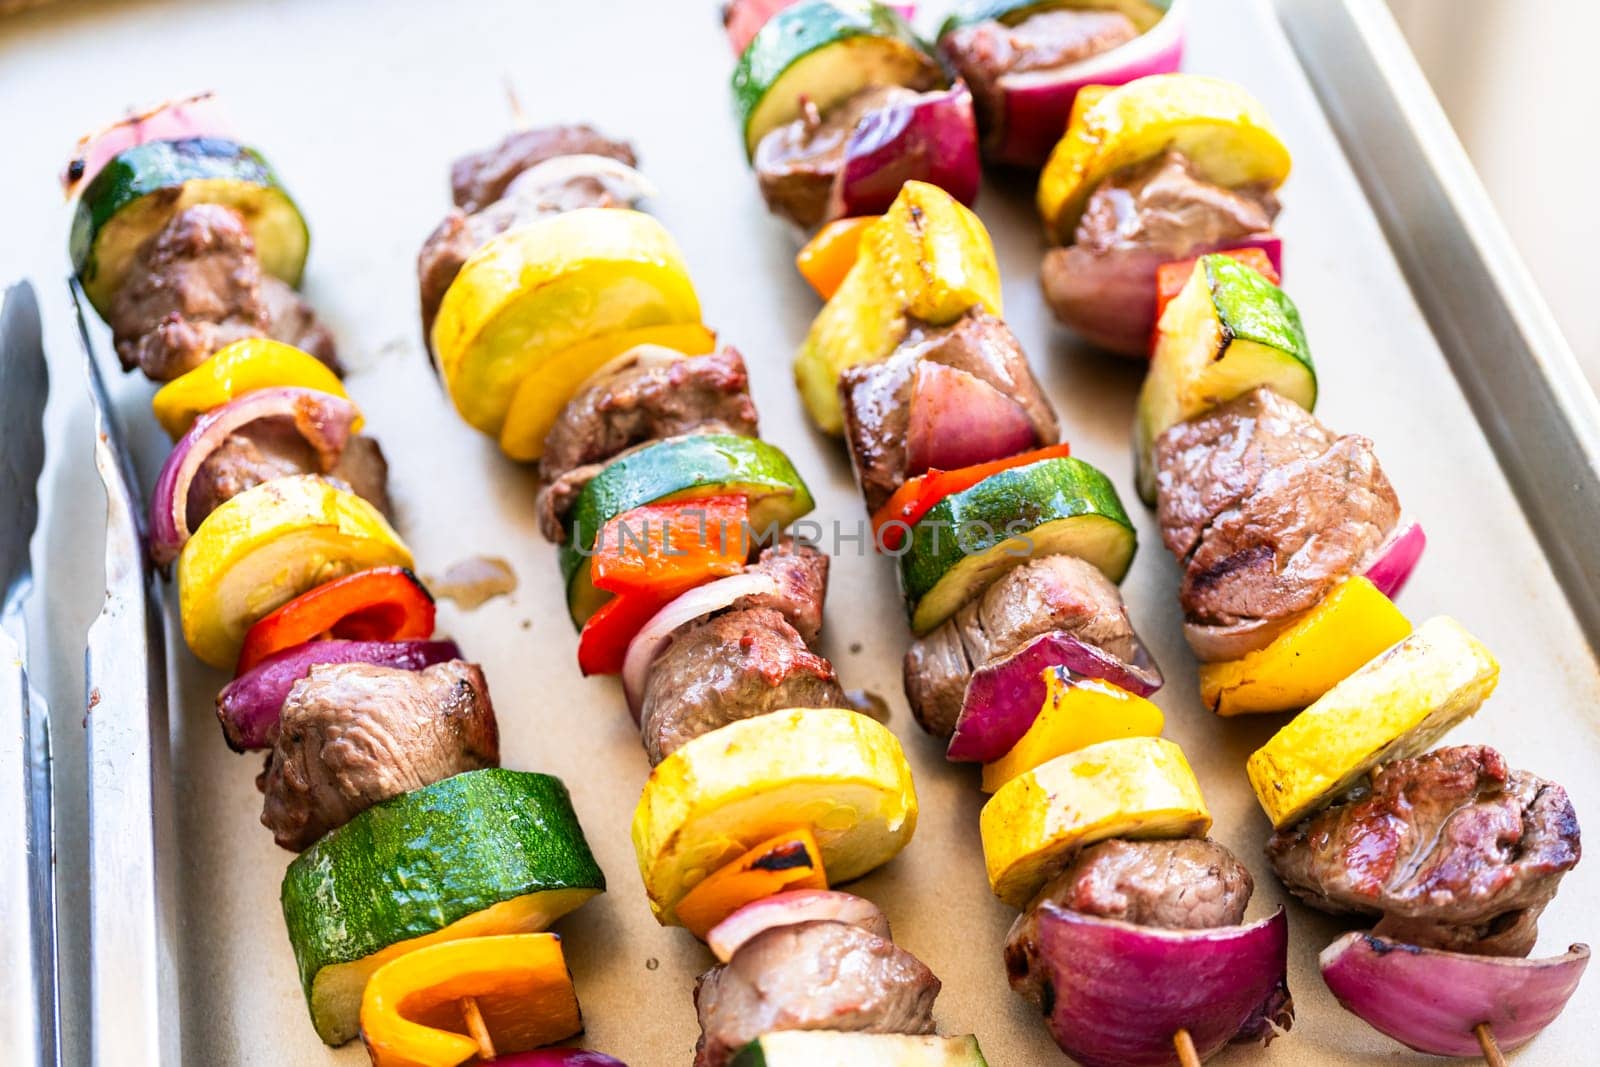 Grill Delights-Beef and Veggies Sizzling on Skewer by arinahabich